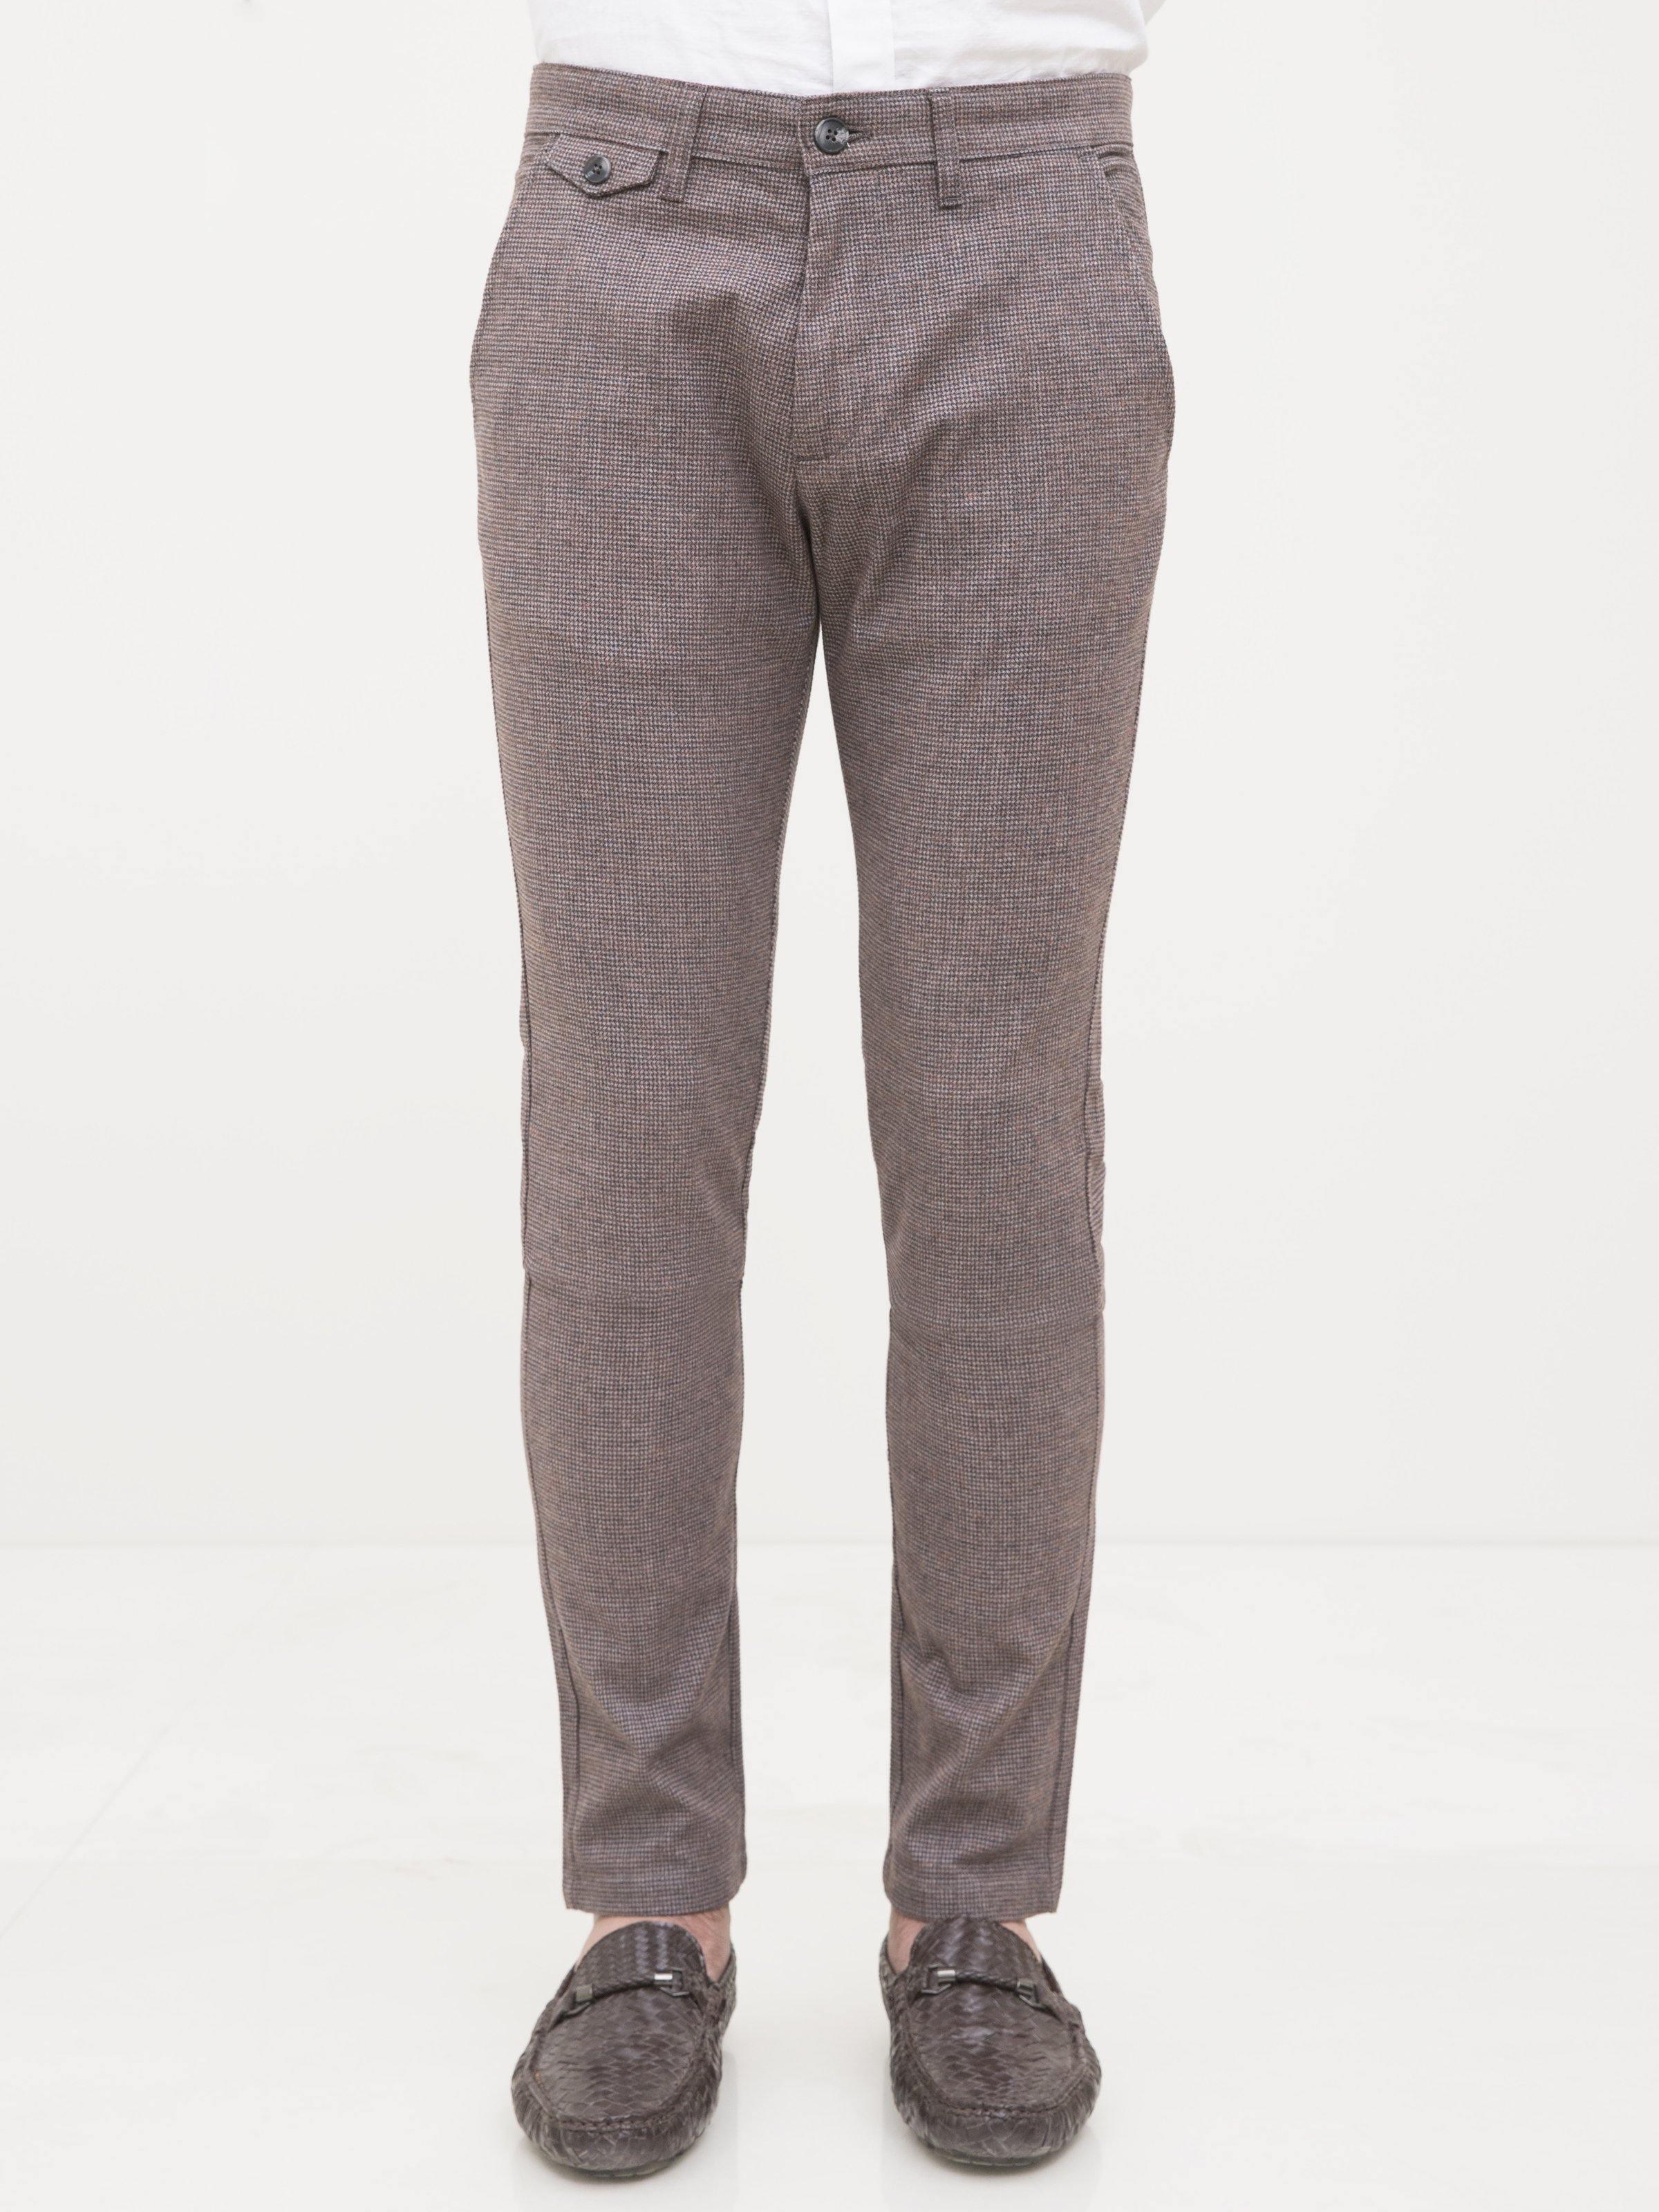 CASUAL PANT CROSS POCKET SLIM FIT RUST GREY at Charcoal Clothing